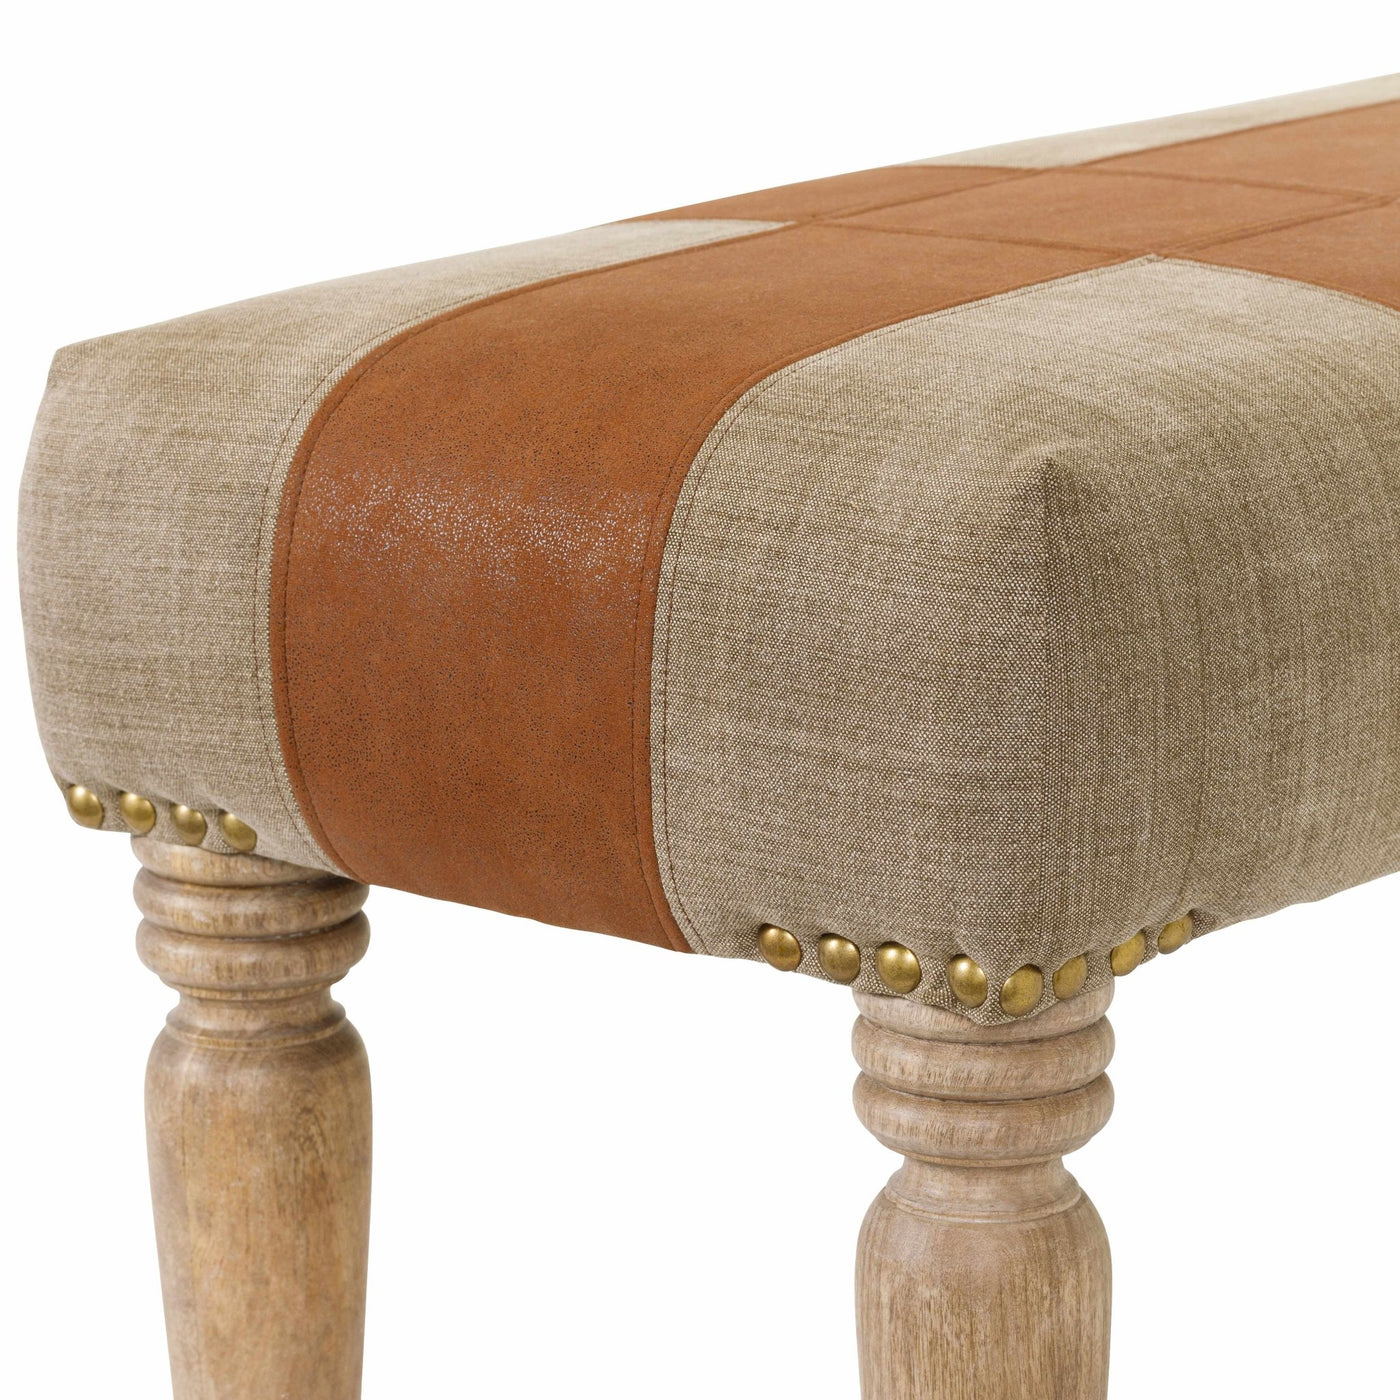 Albanel Bench - Sweet Water Decor - Benches